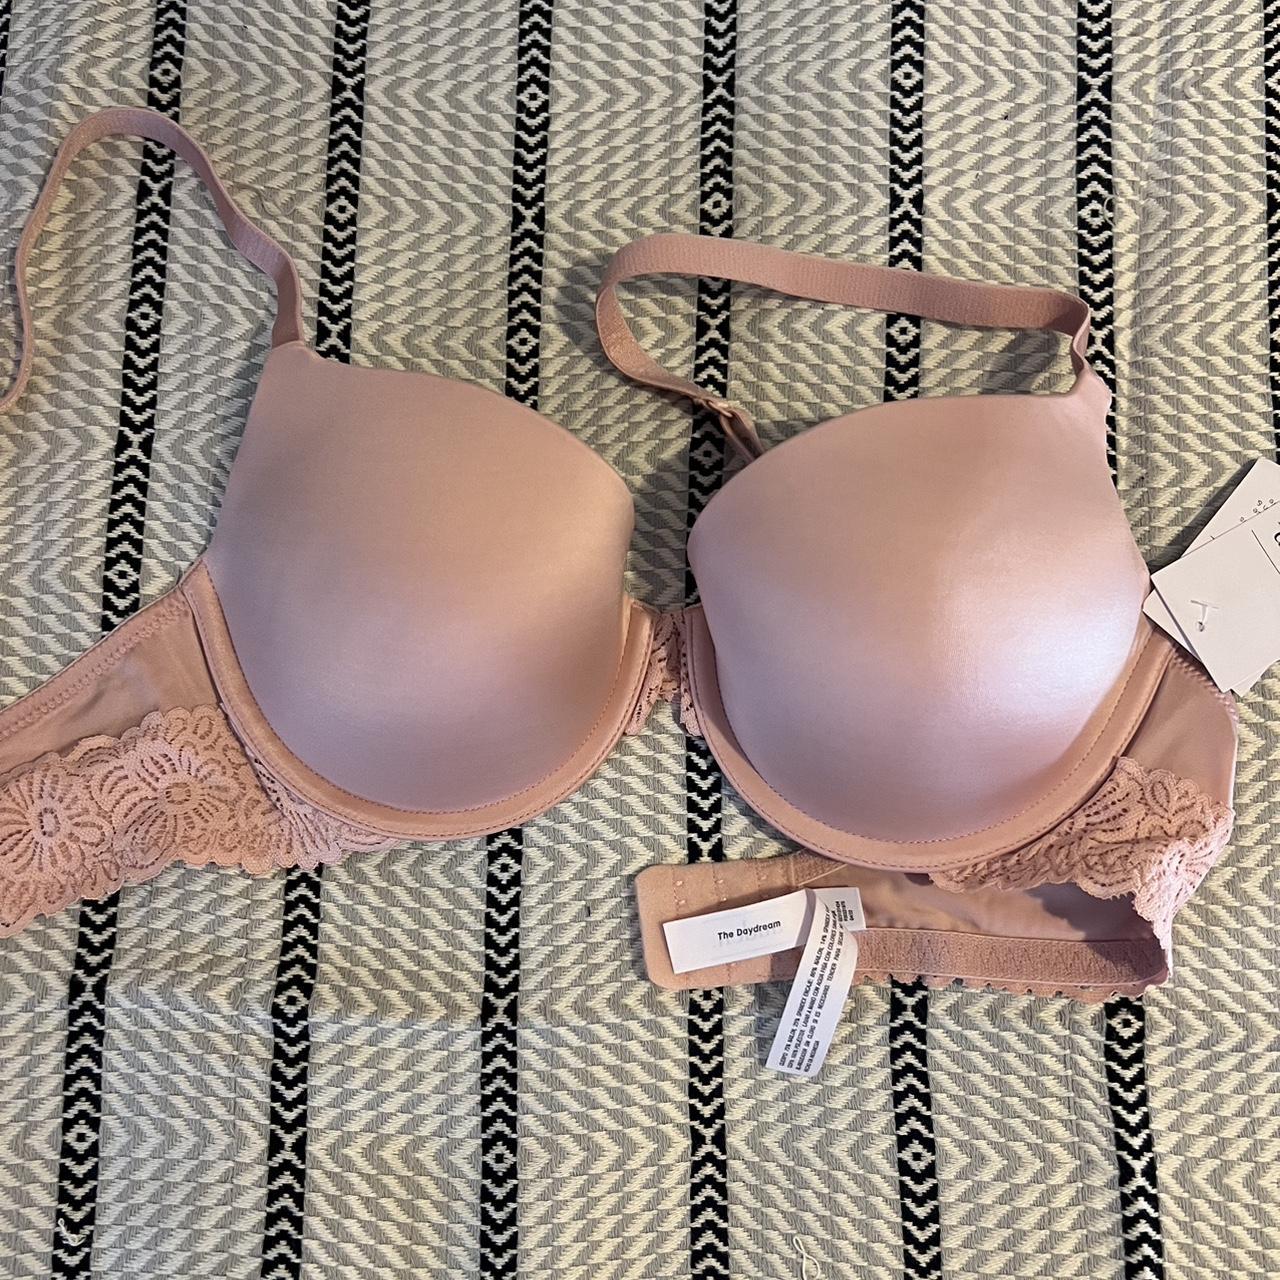 Auden 34c bra new with tags 